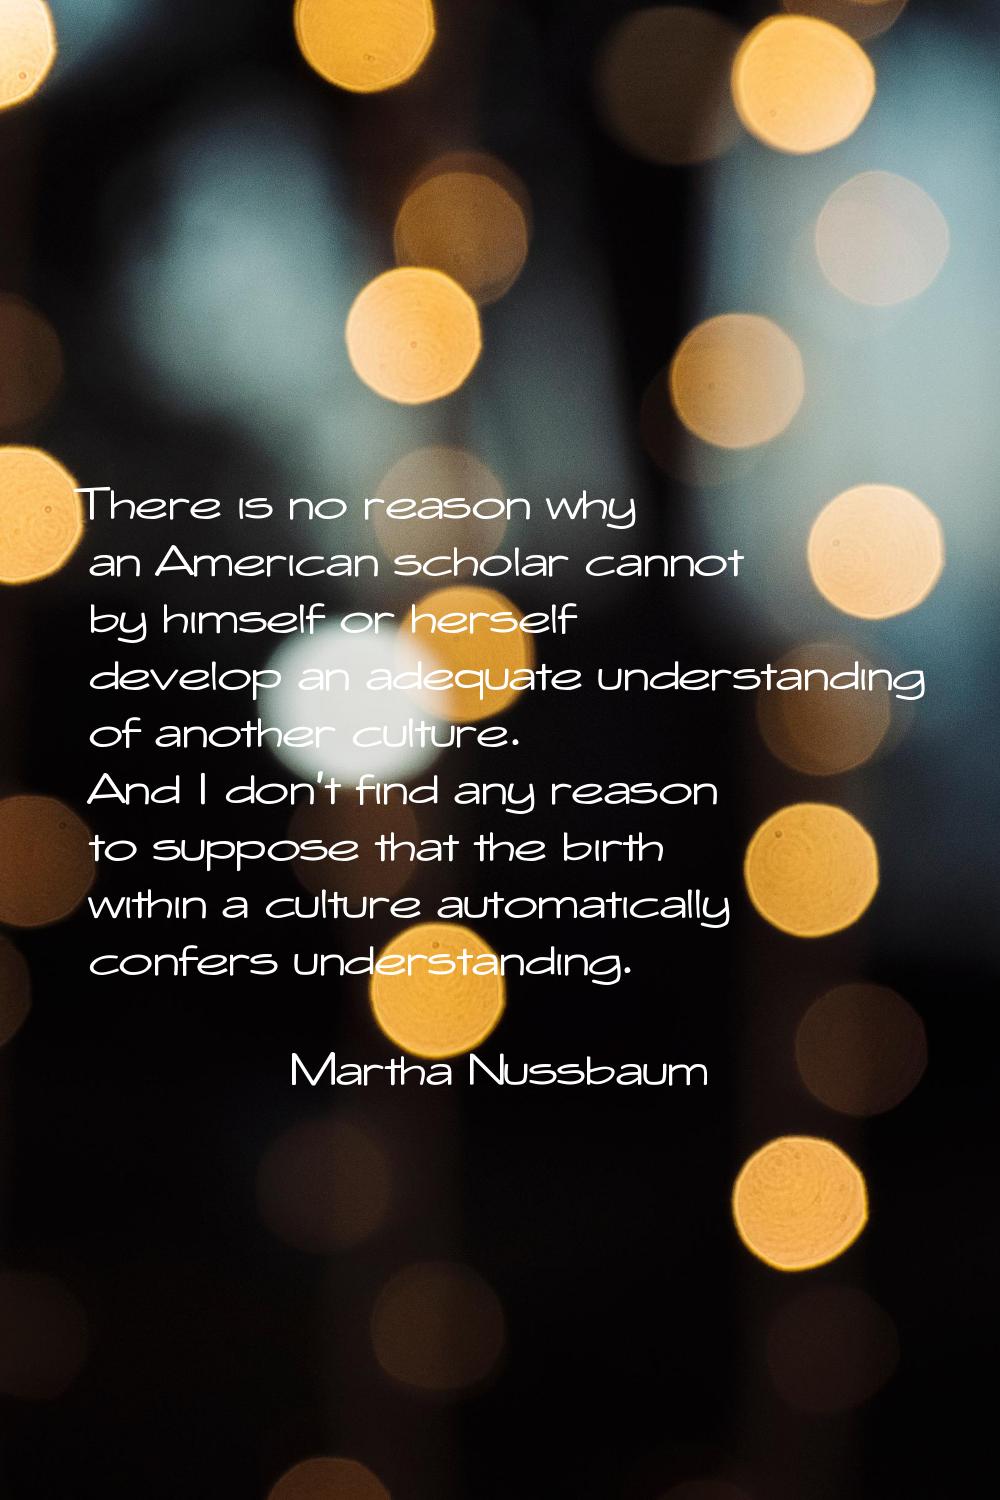 There is no reason why an American scholar cannot by himself or herself develop an adequate underst